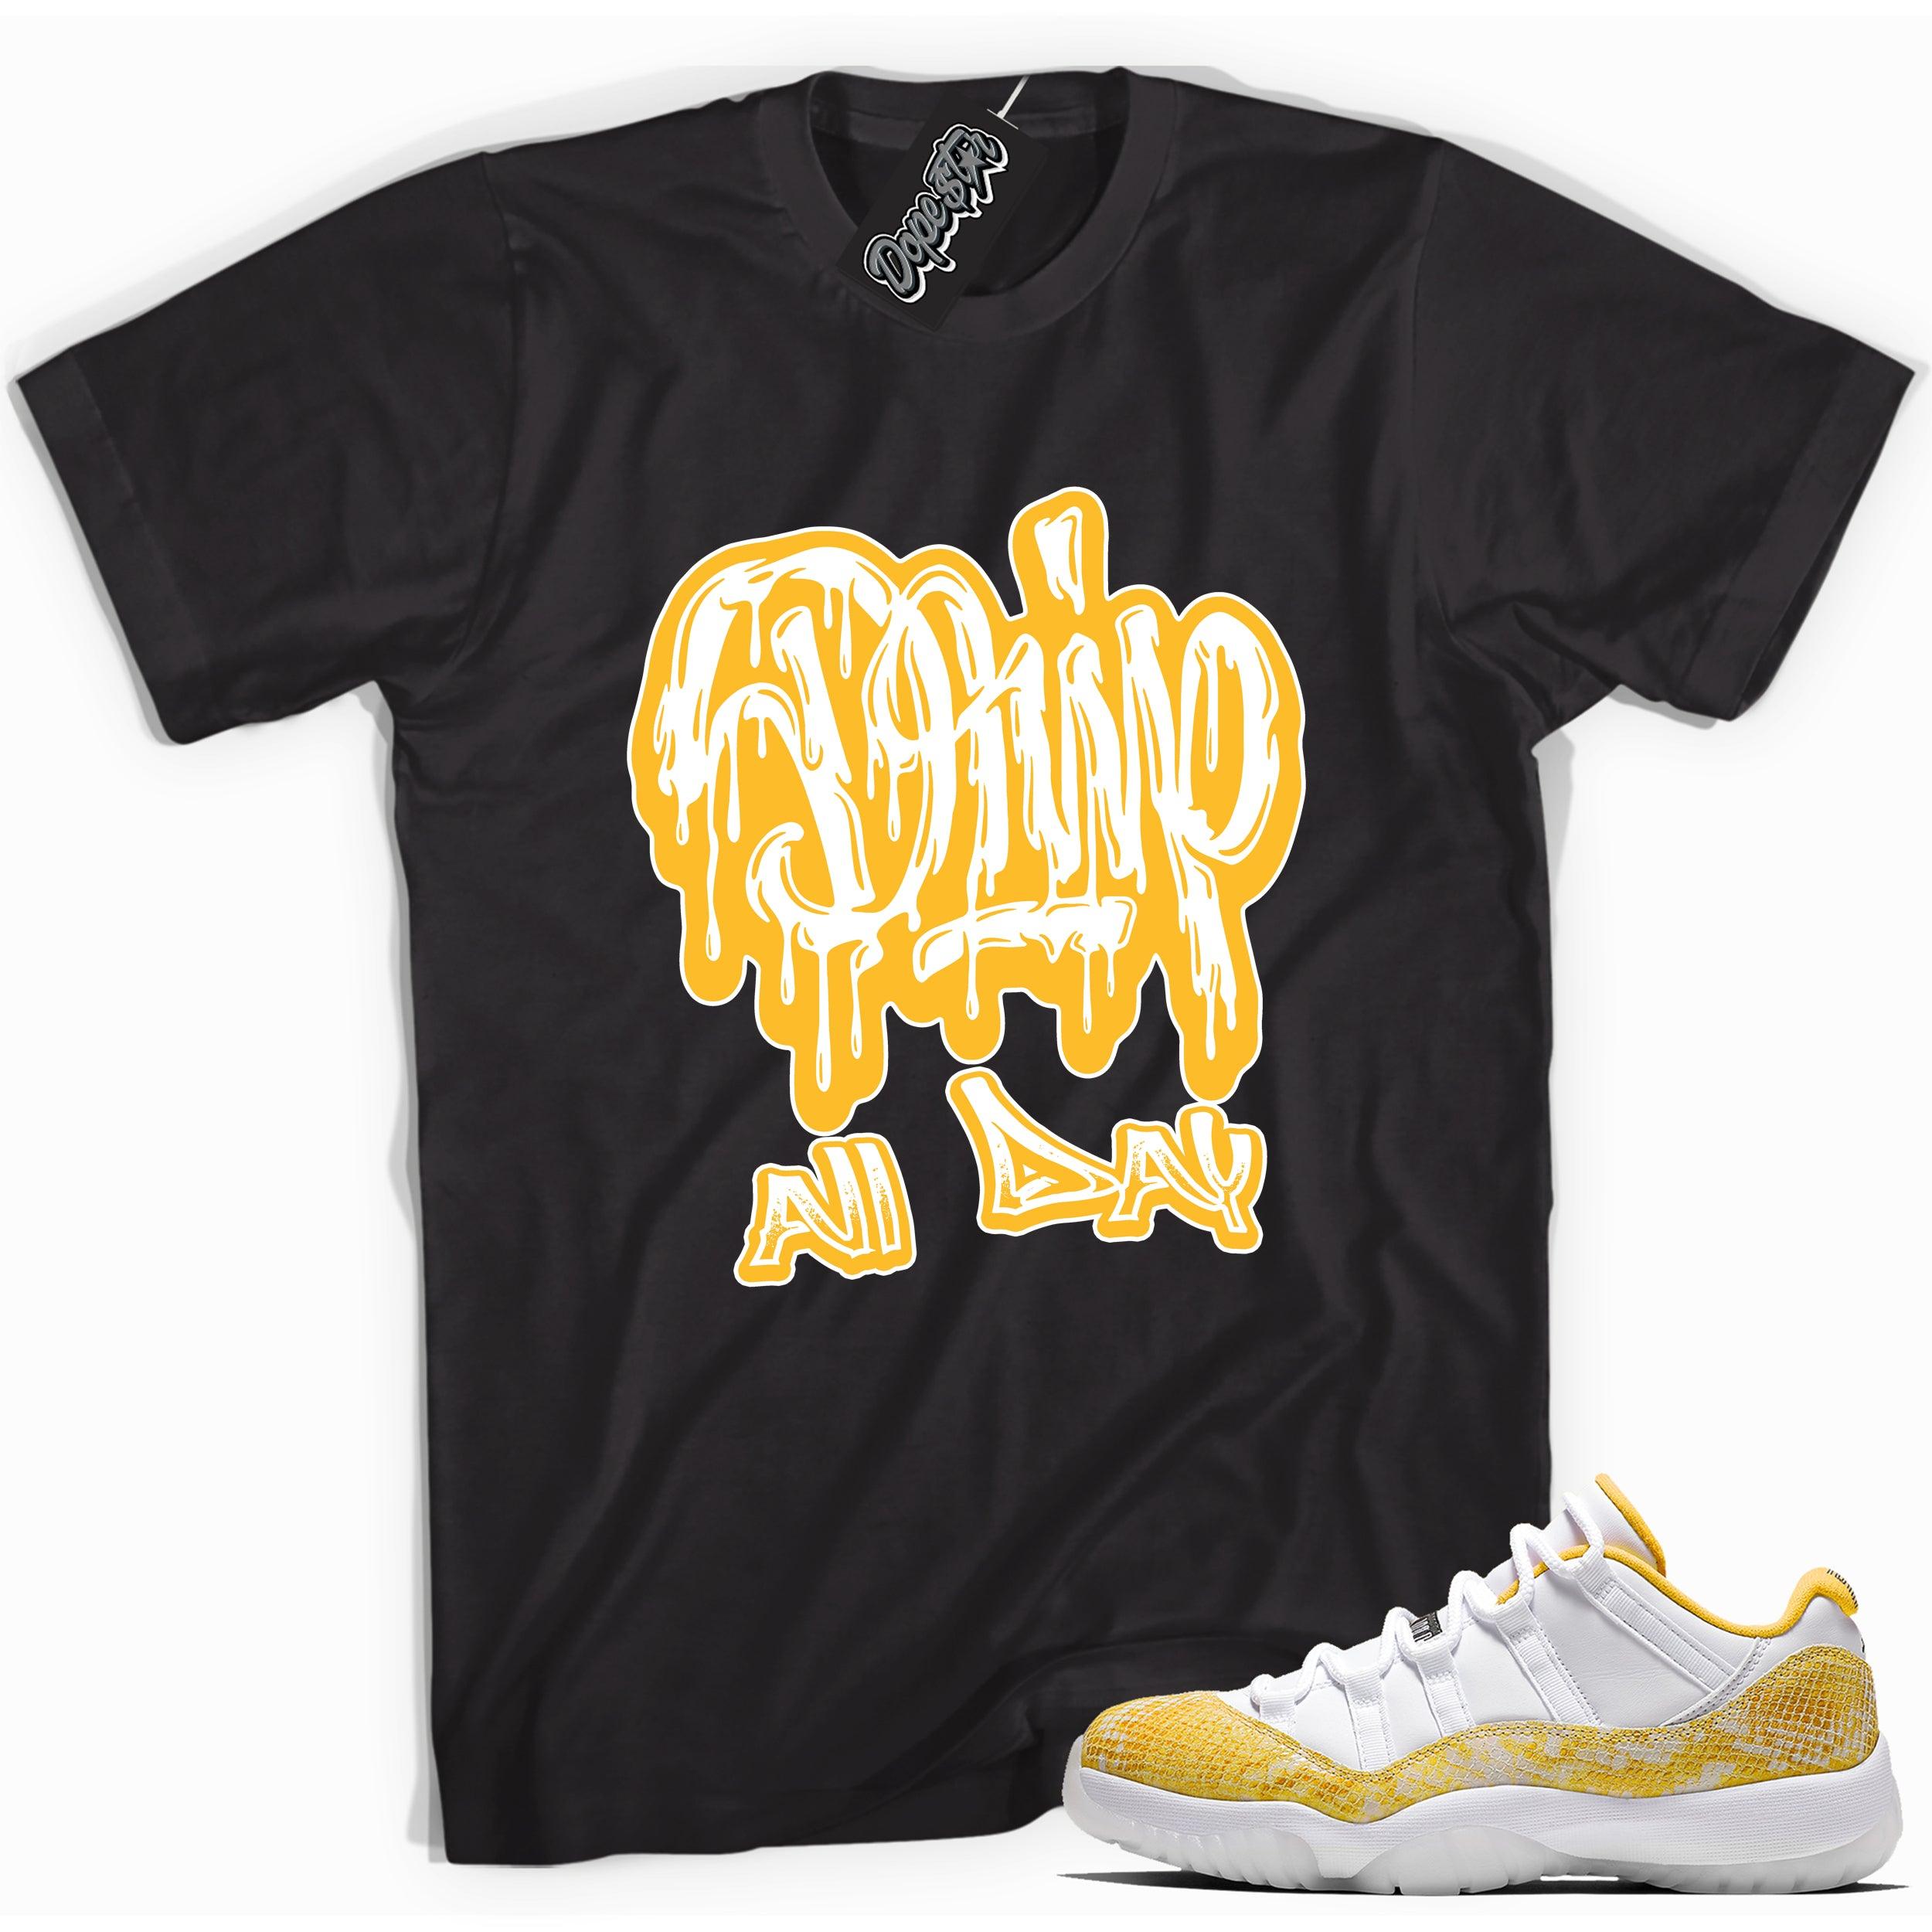 Cool black graphic tee with 'drip all day' print, that perfectly matches  Air Jordan 11 Low Yellow Snakeskin sneakers